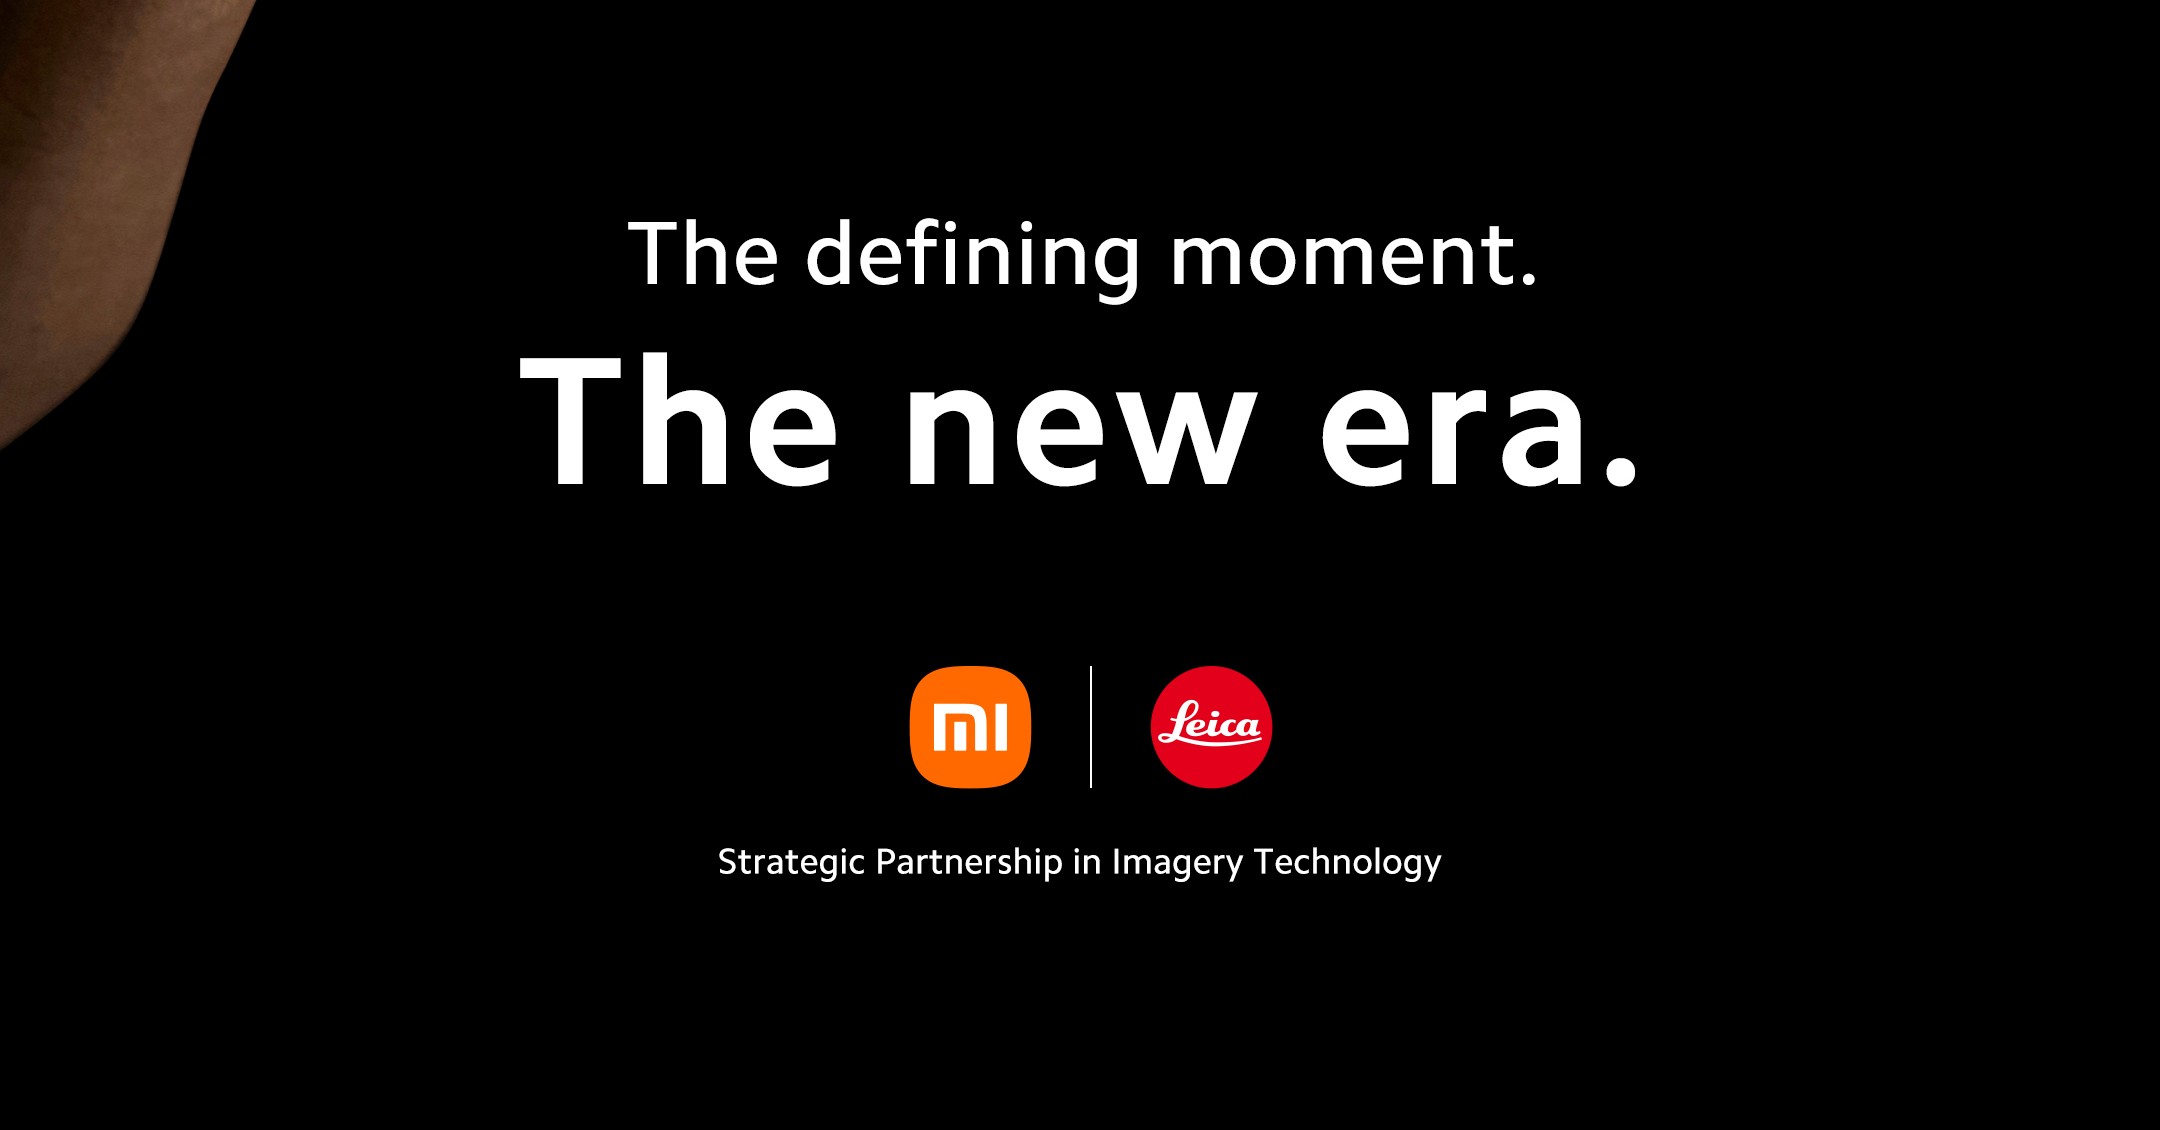 Xiaomi and Leica are now officially partnered in Imagery Technology